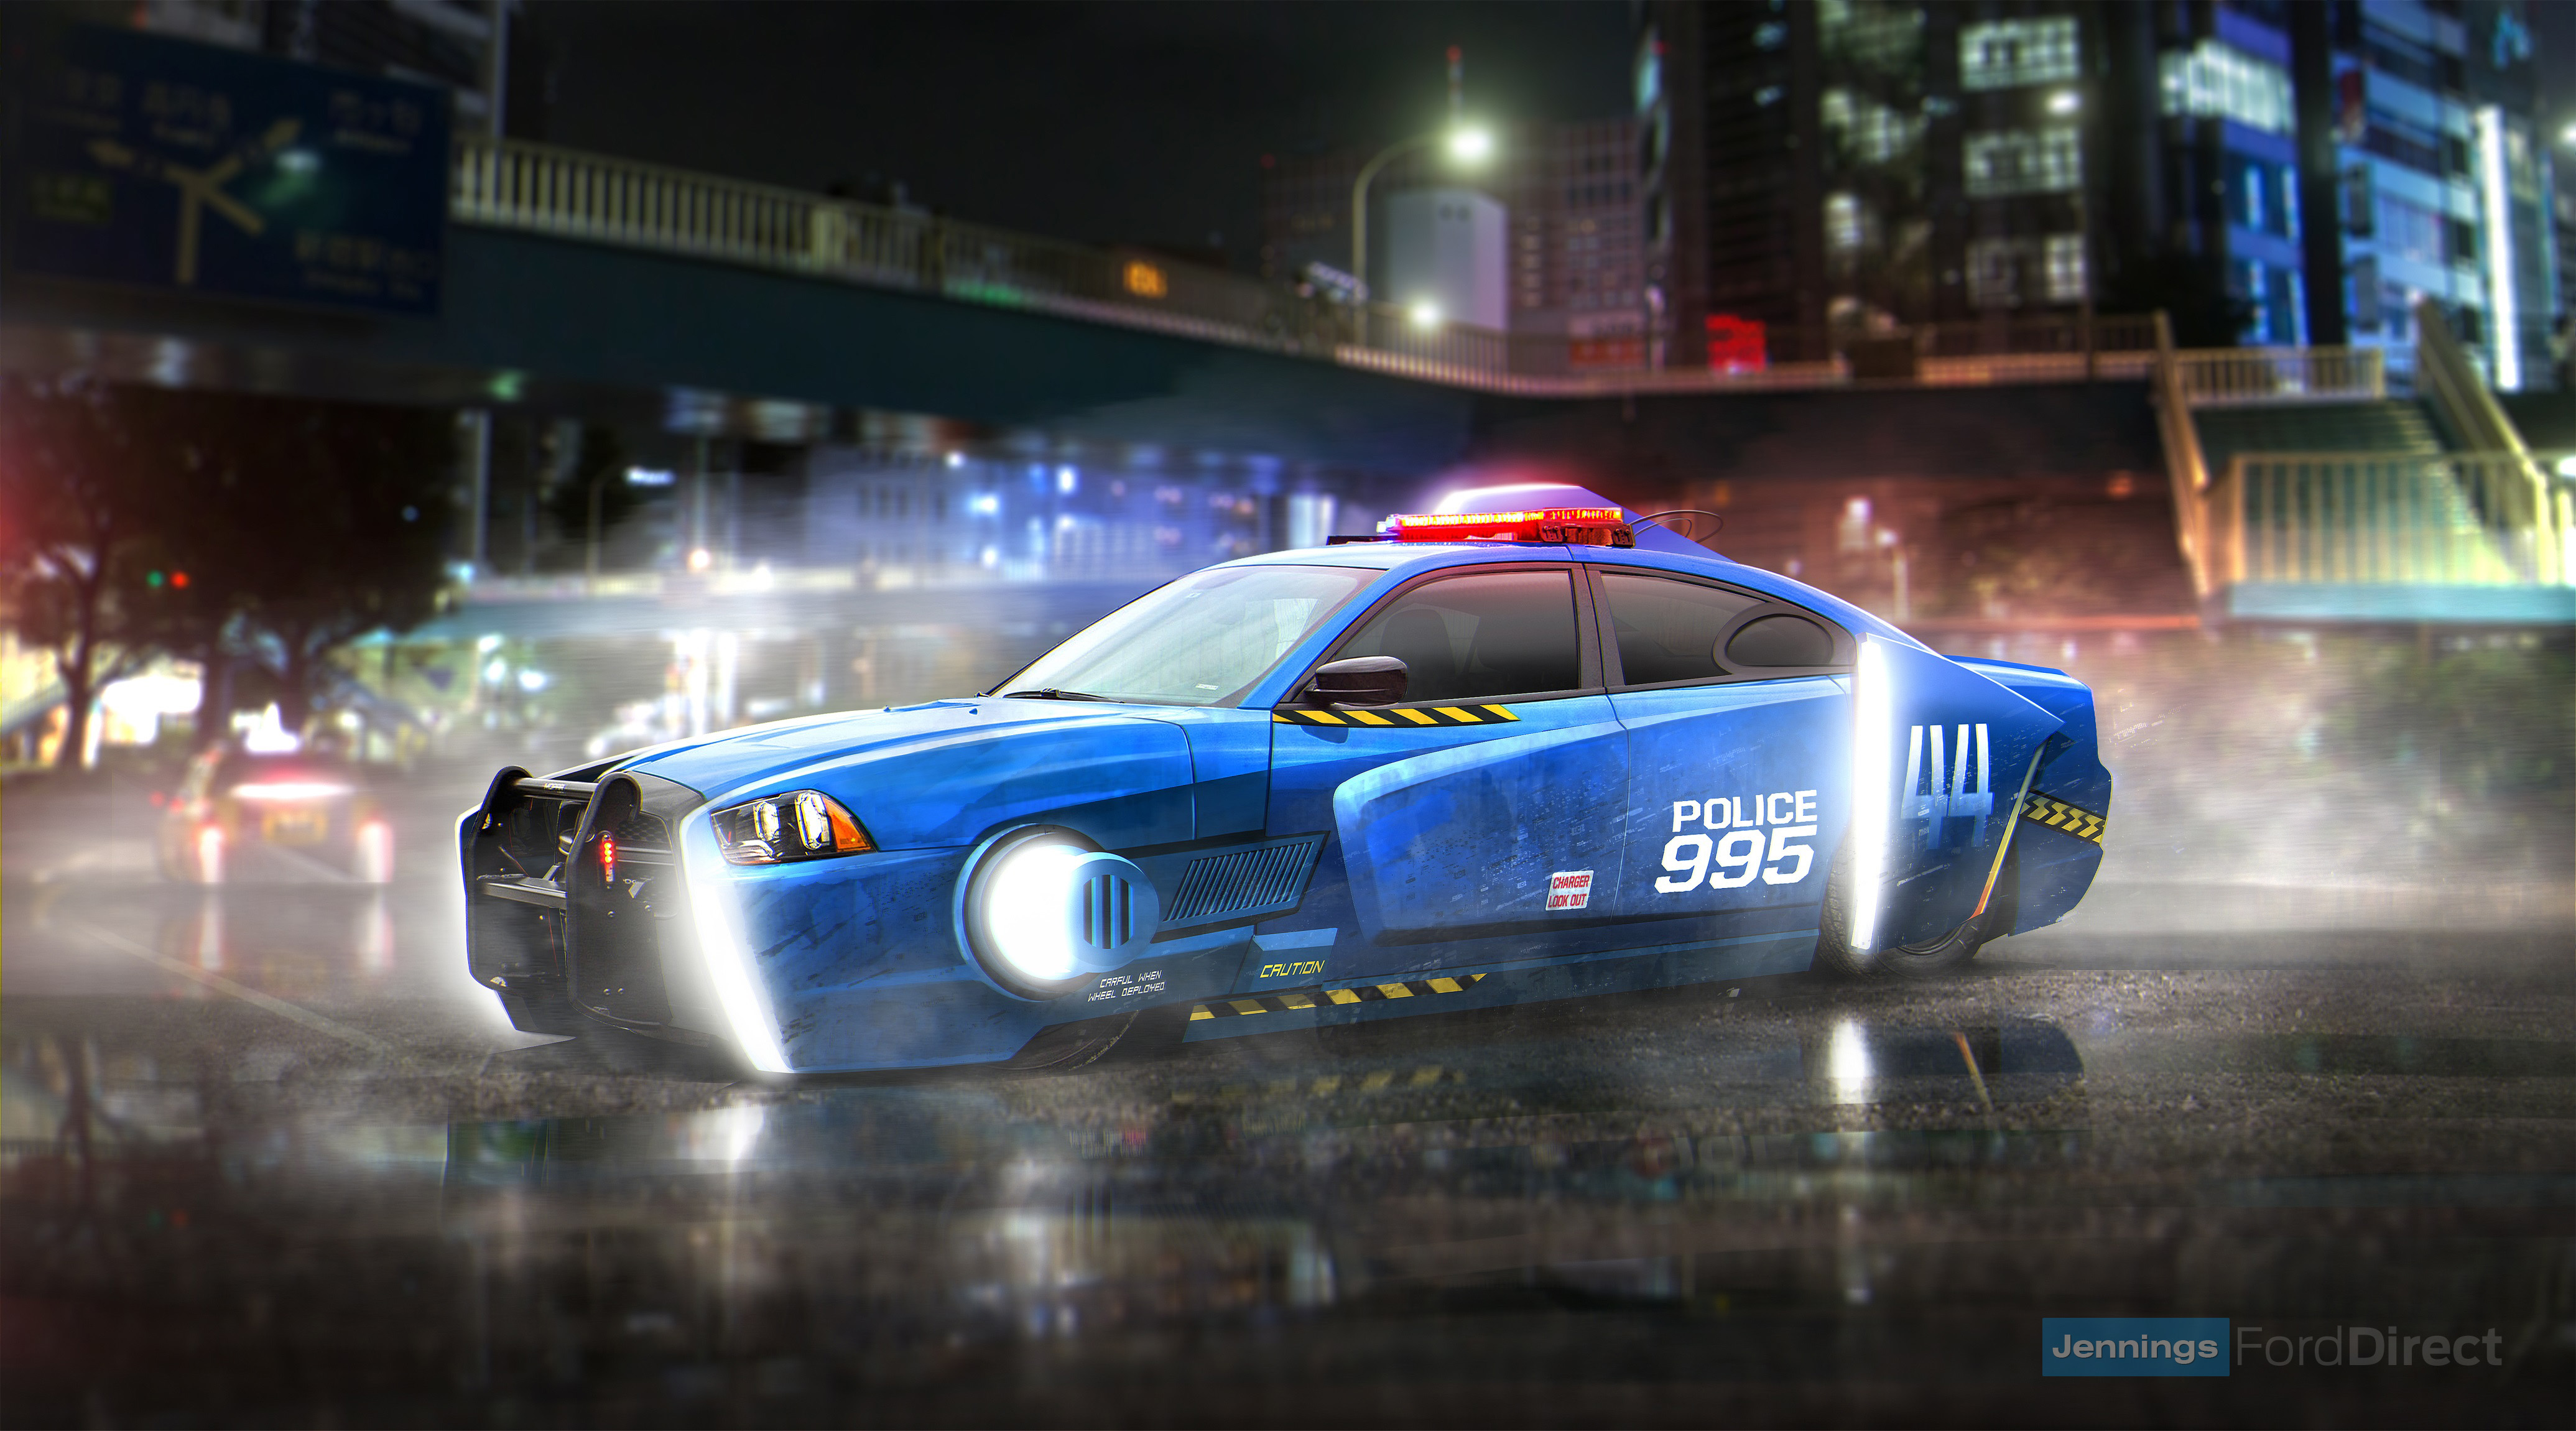 Dodge Charger Pursuit Wallpapers